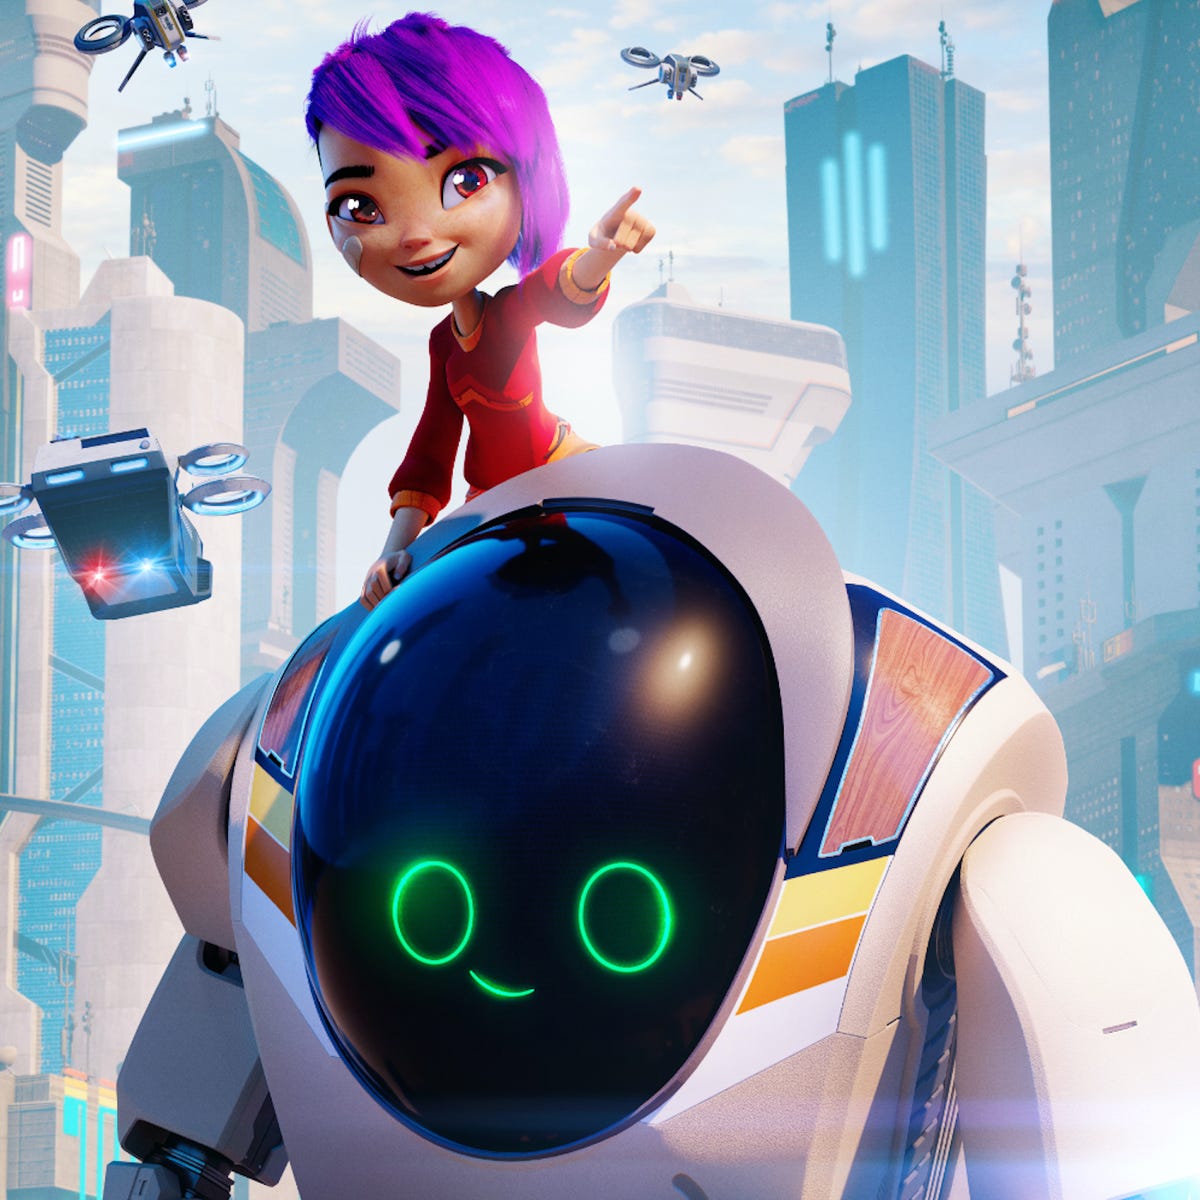 Netflix's new animated movie is like Big Hero 6 mixed with The Iron Giant -  CNET